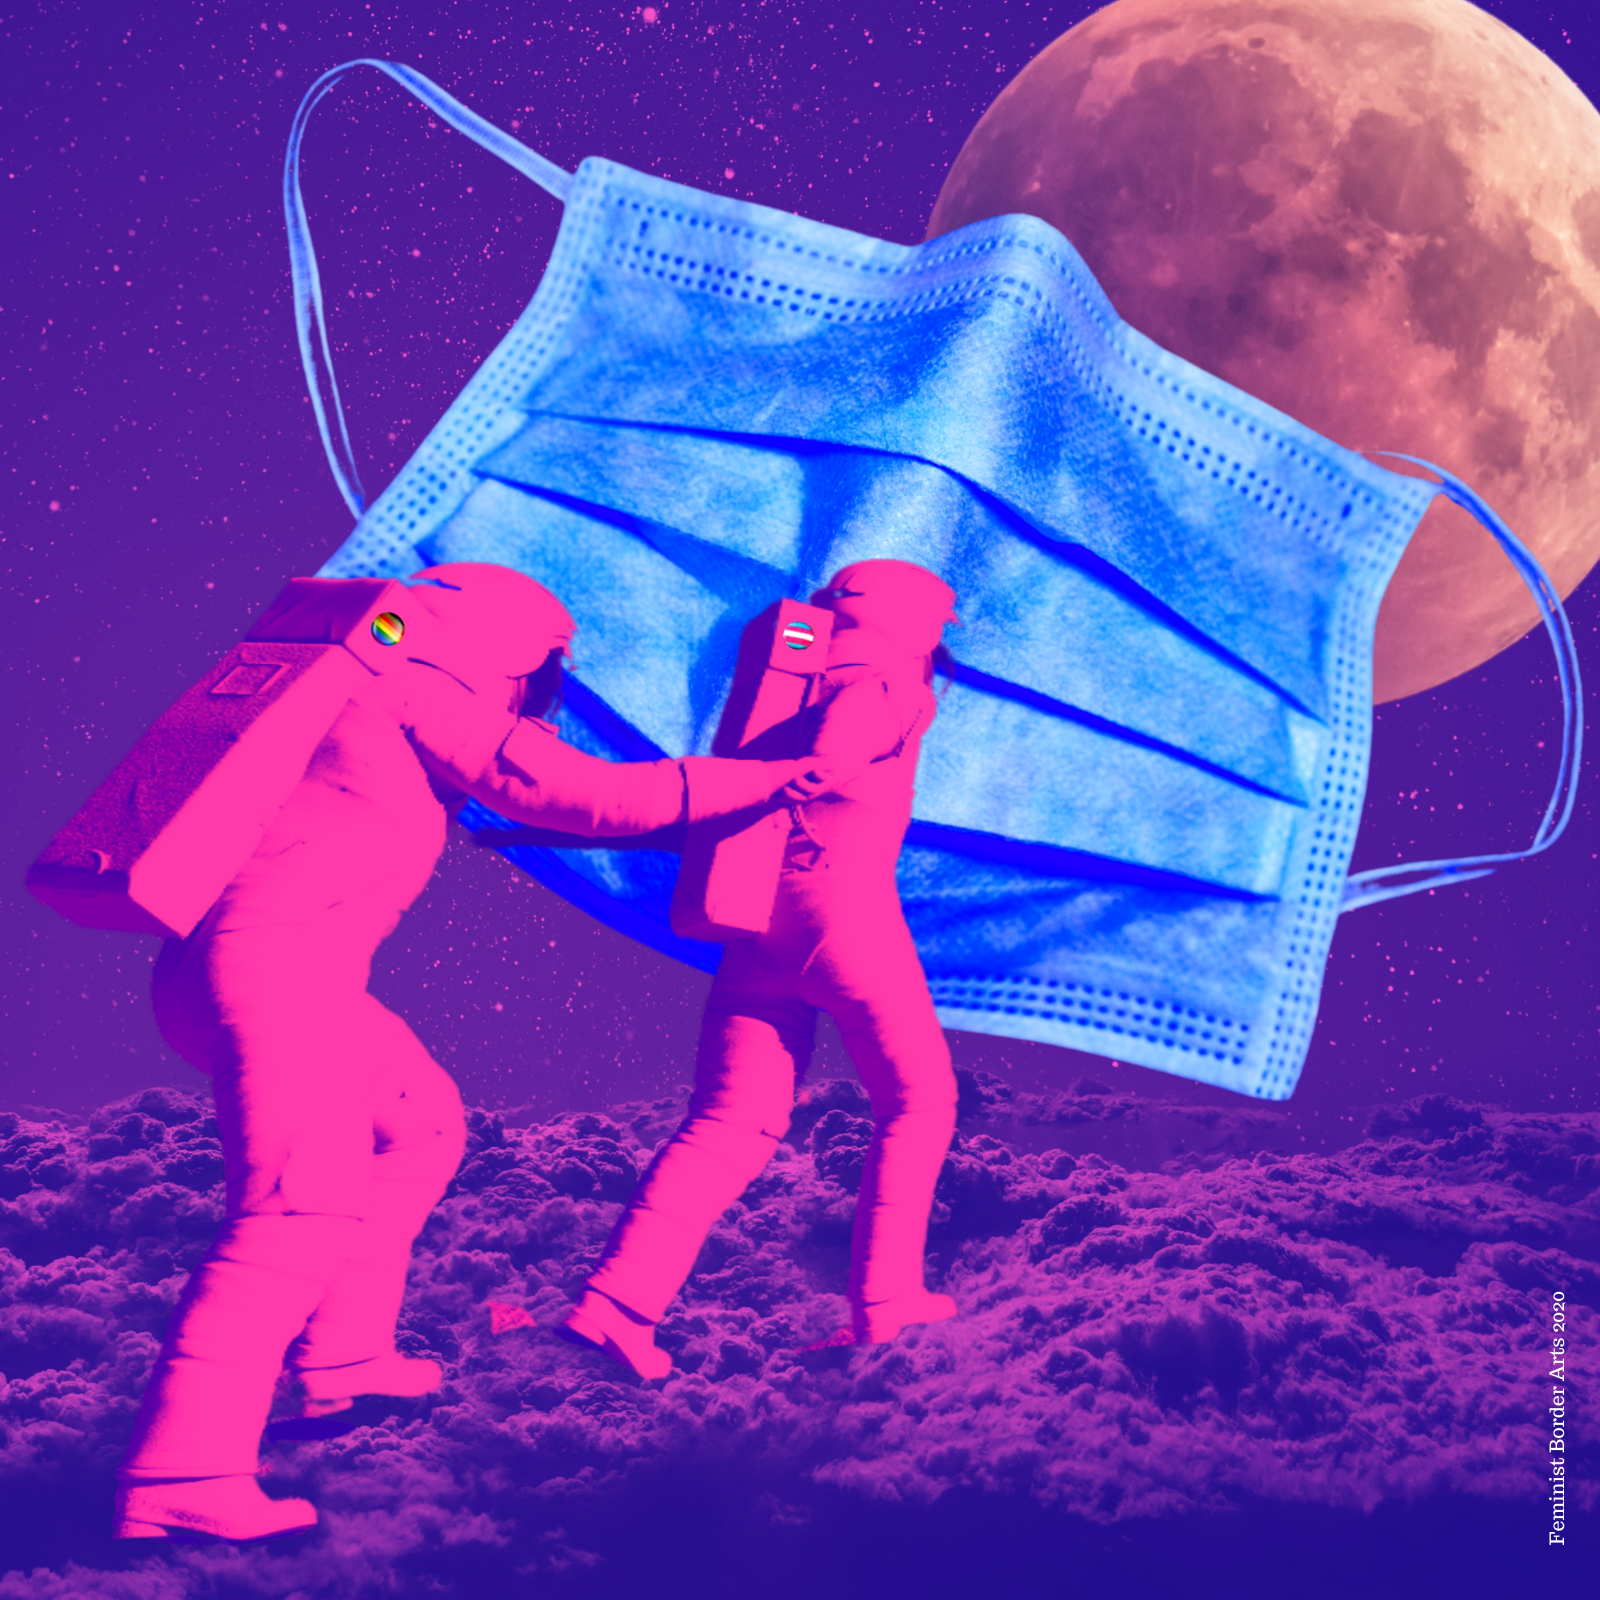 Two figures running away together under a giant mask-like moon